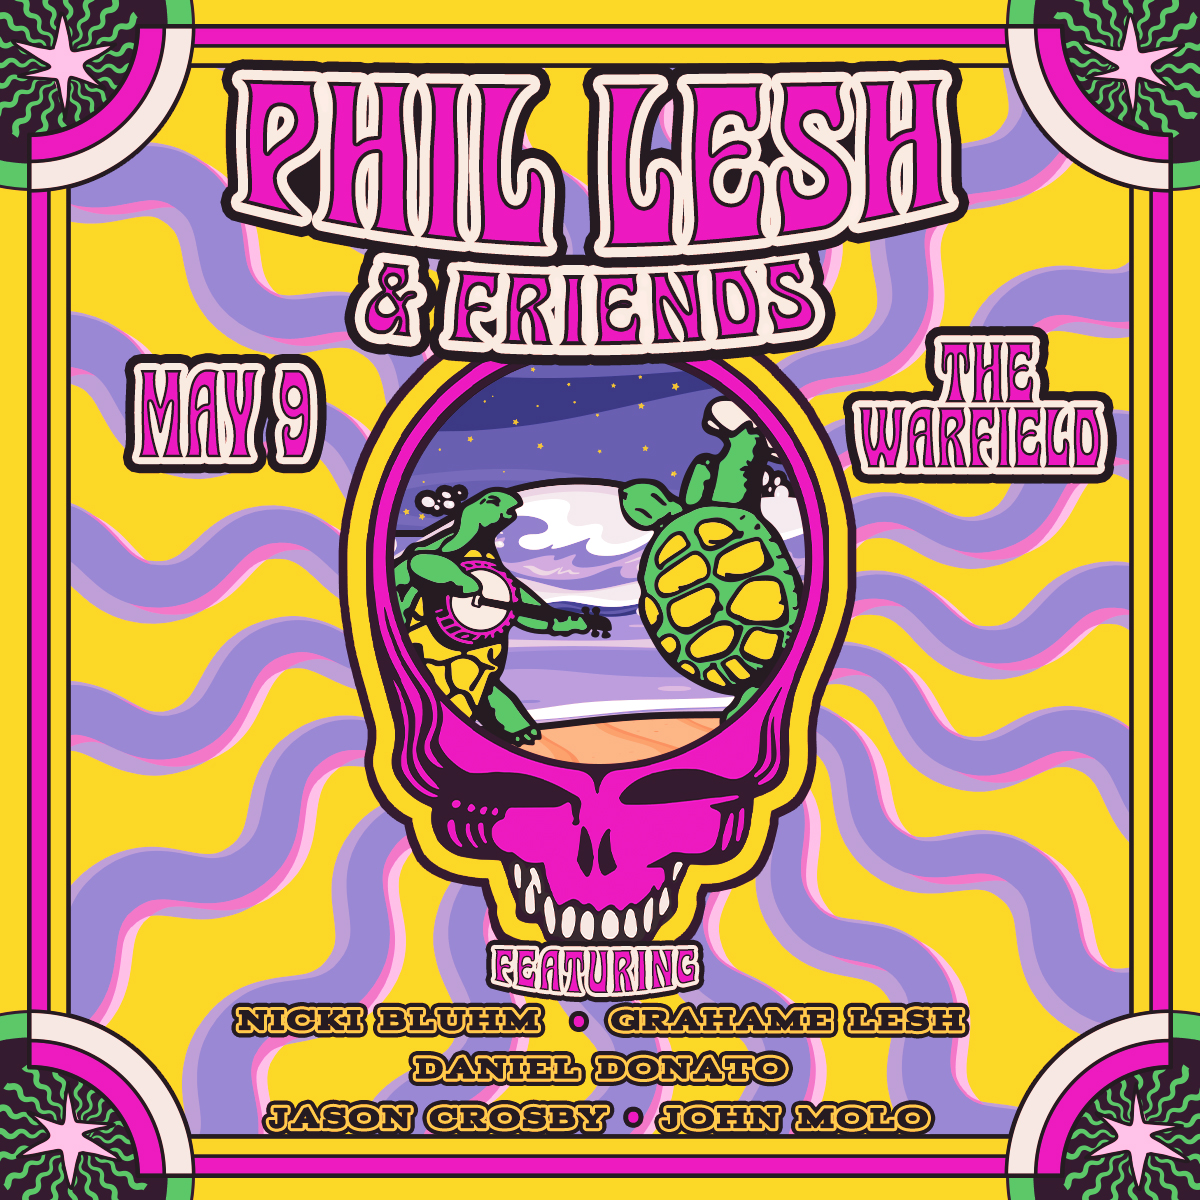 Howdy, friends! How about we all have a high time in San Francisco with Phil Lesh & Friends on May 9th at @thewarfield?! Yeehaw. Tickets on sale this Friday 4/19 at 10am PT. axs.com/events/544302/…